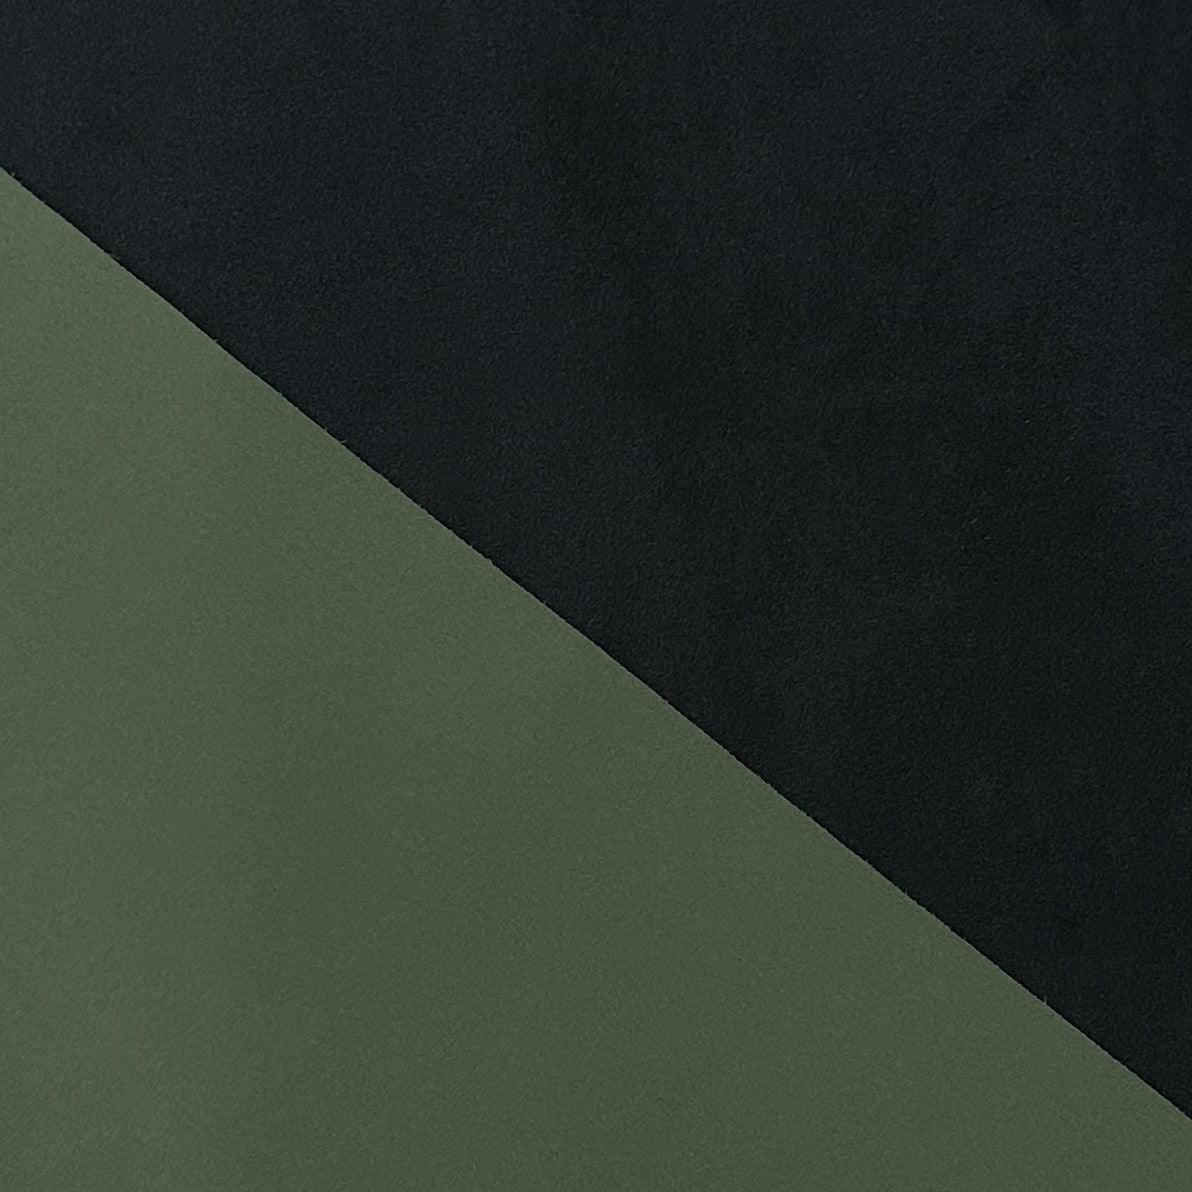 Olive and Black Softshell Fabric - Two Sides - Nature's Fabrics